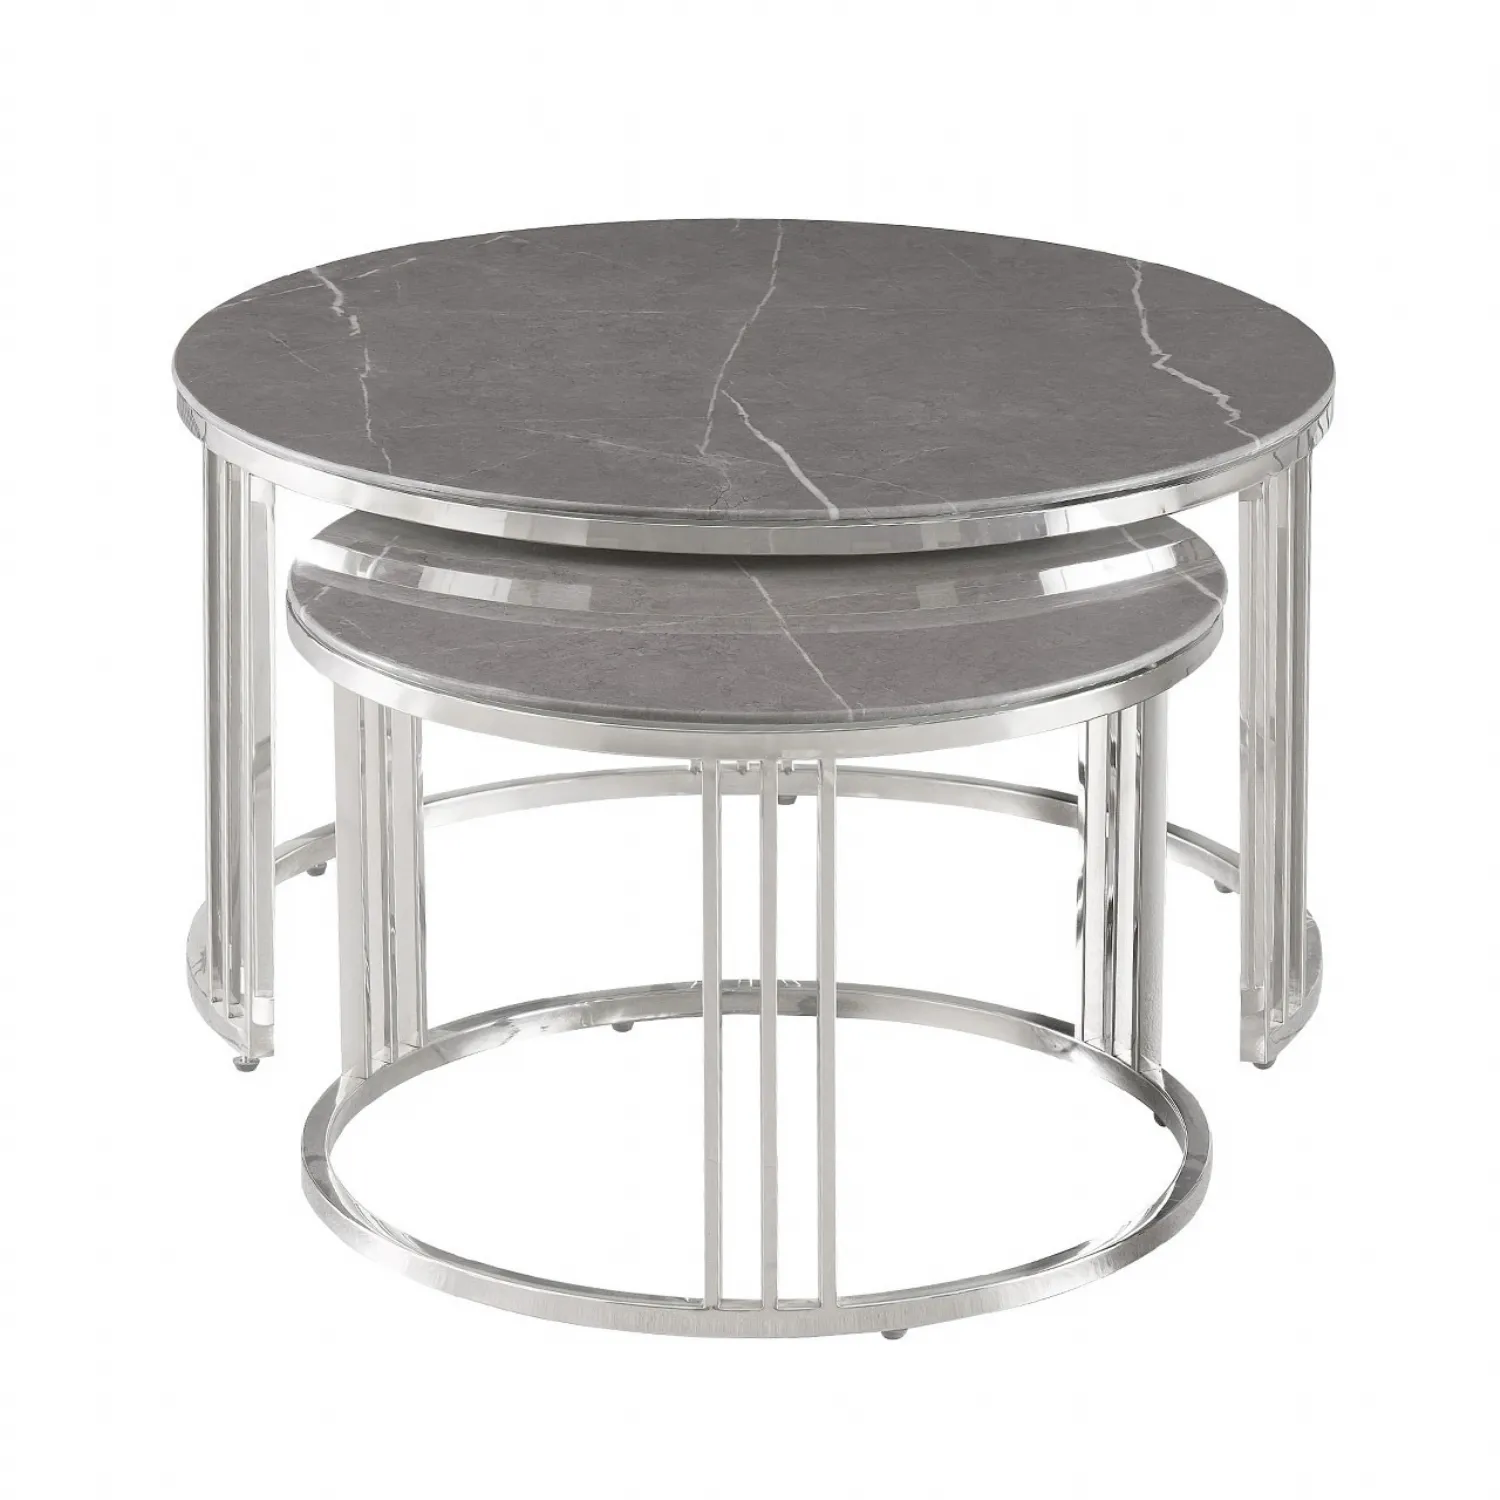 Set of 2 Round Chrome Coffee Tables with Marble Top